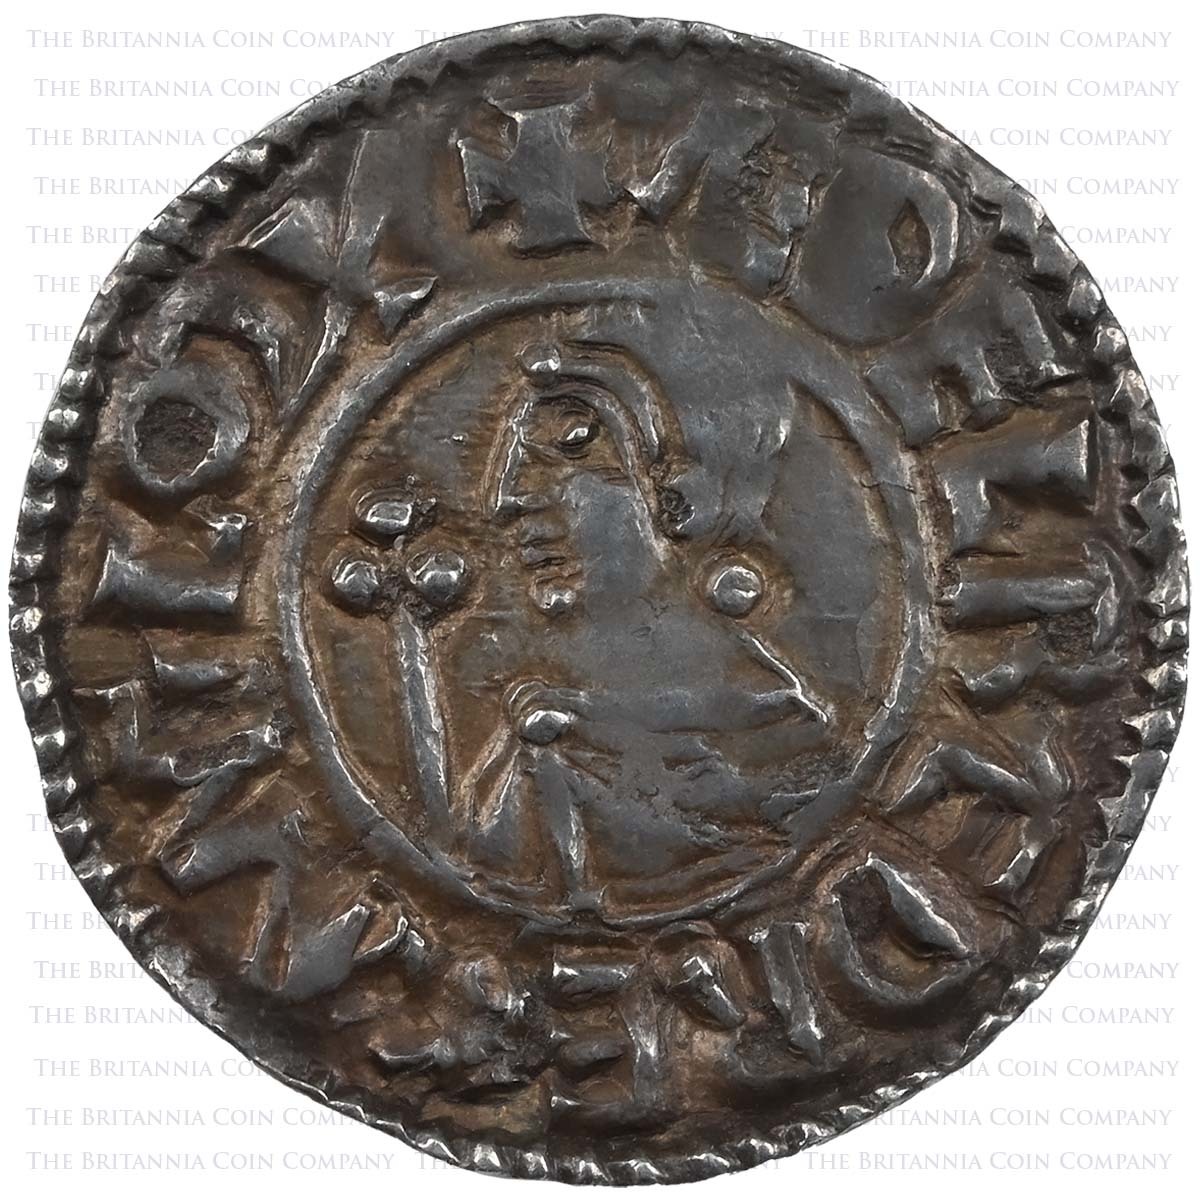 995-997 Aethelred II CRVX Penny Brihtsige on Winchester Obverse